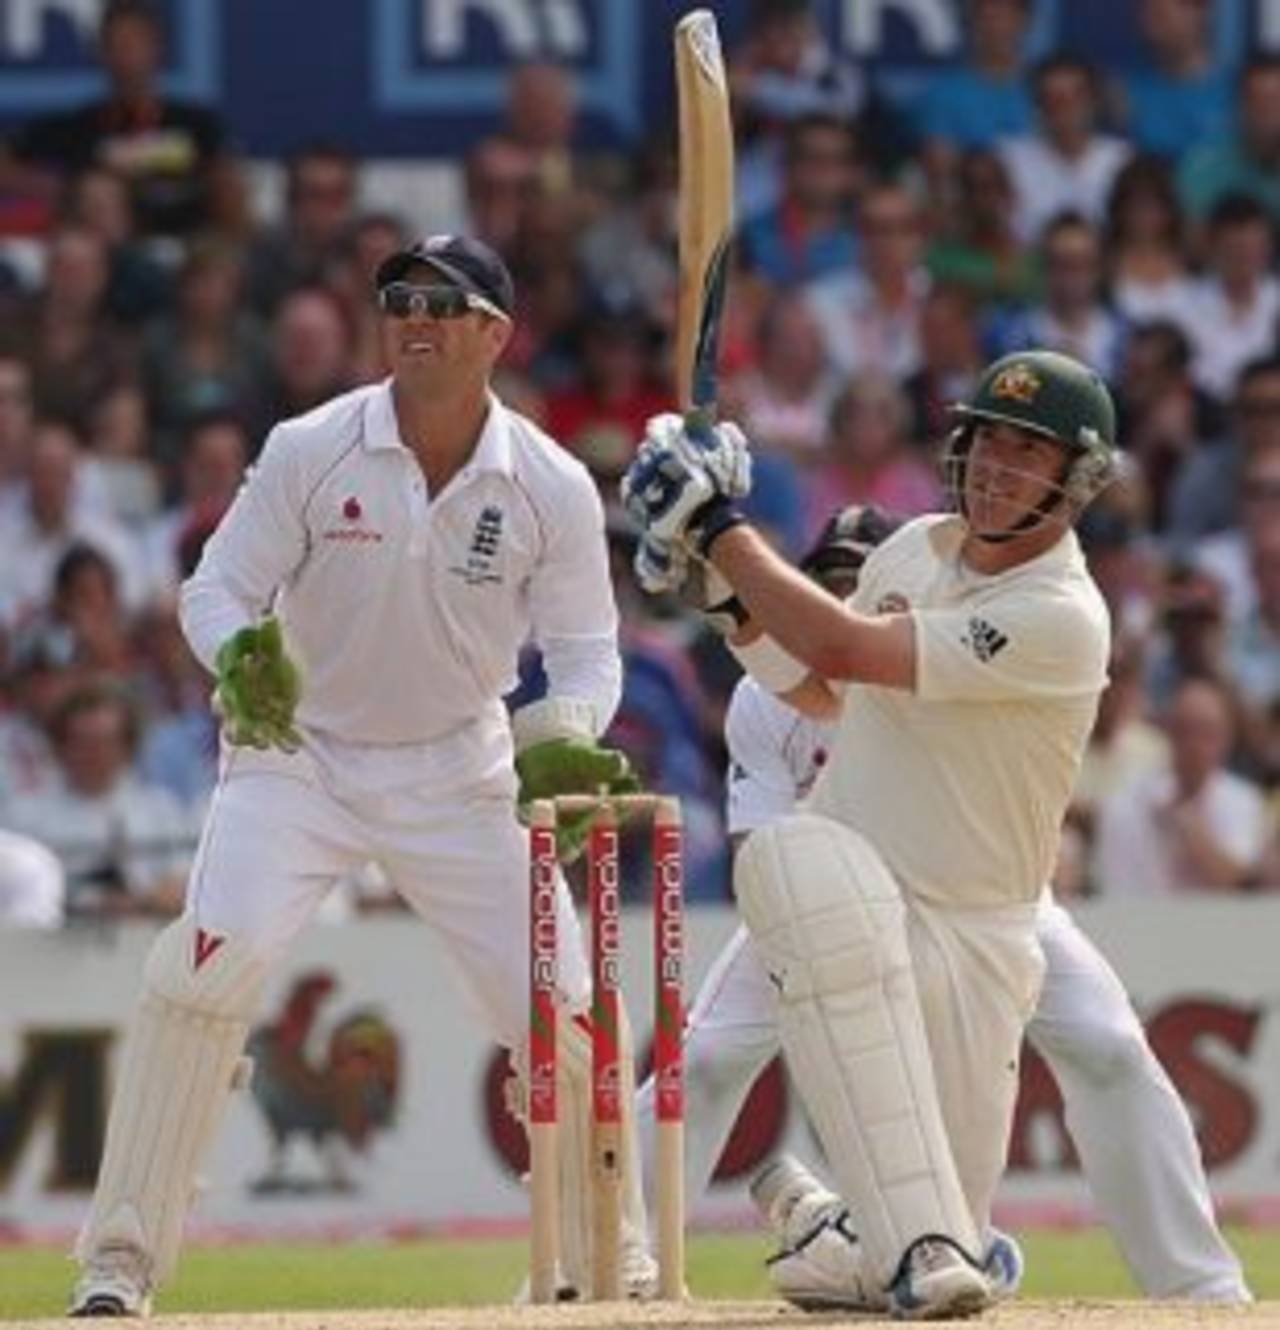 Marcus North reached his century with a six, England v Australia, 4th Test, Headingley, 2nd day, August 8, 2009